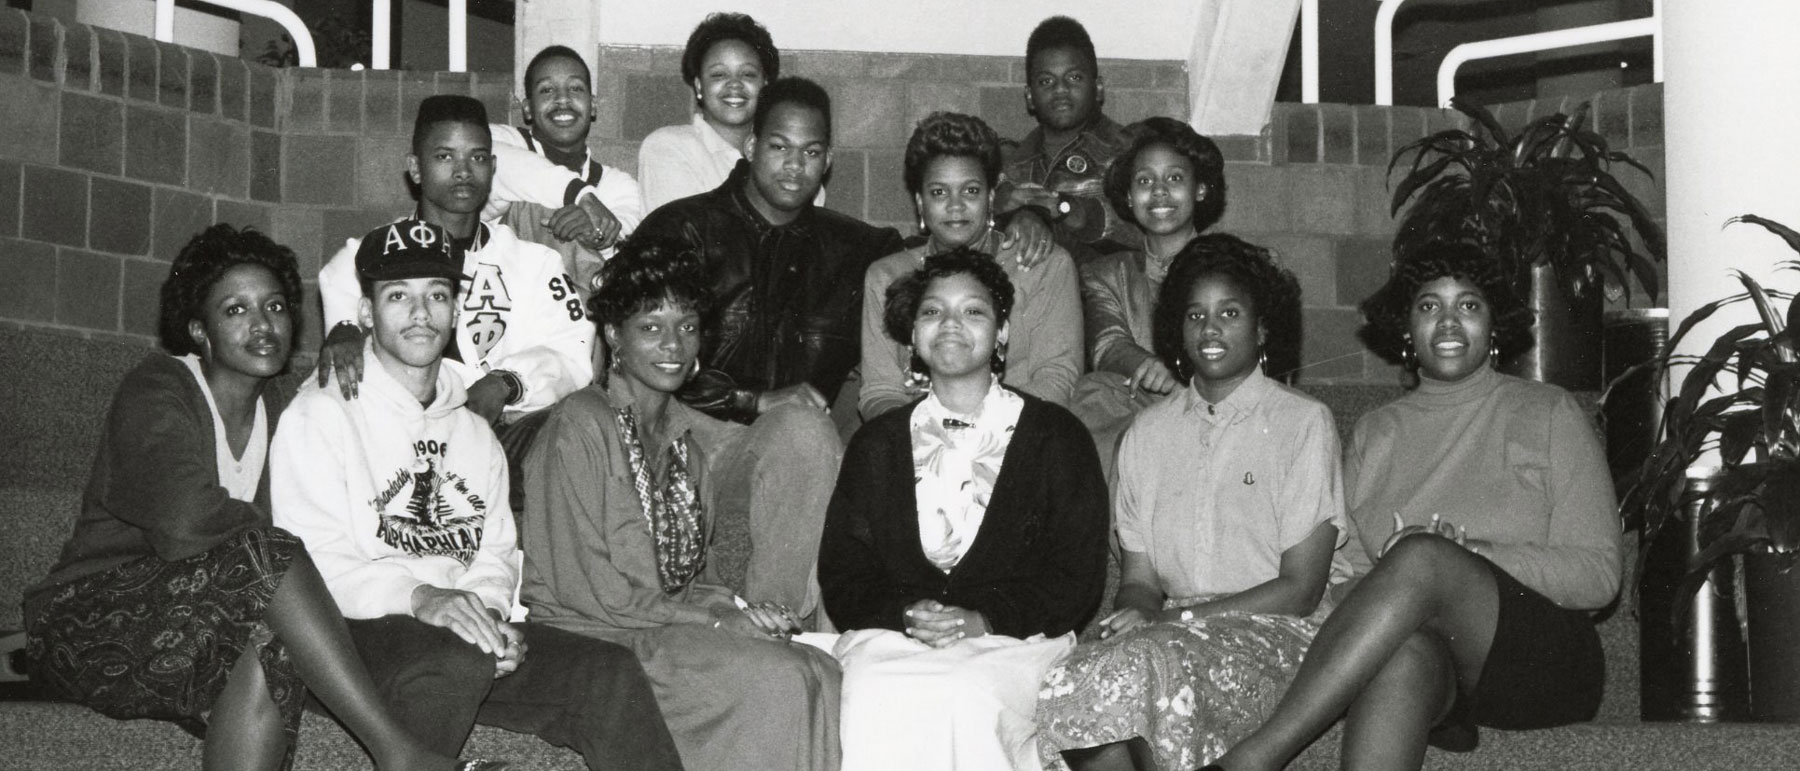 members of the black caucus at v.c.u. in the year 1990